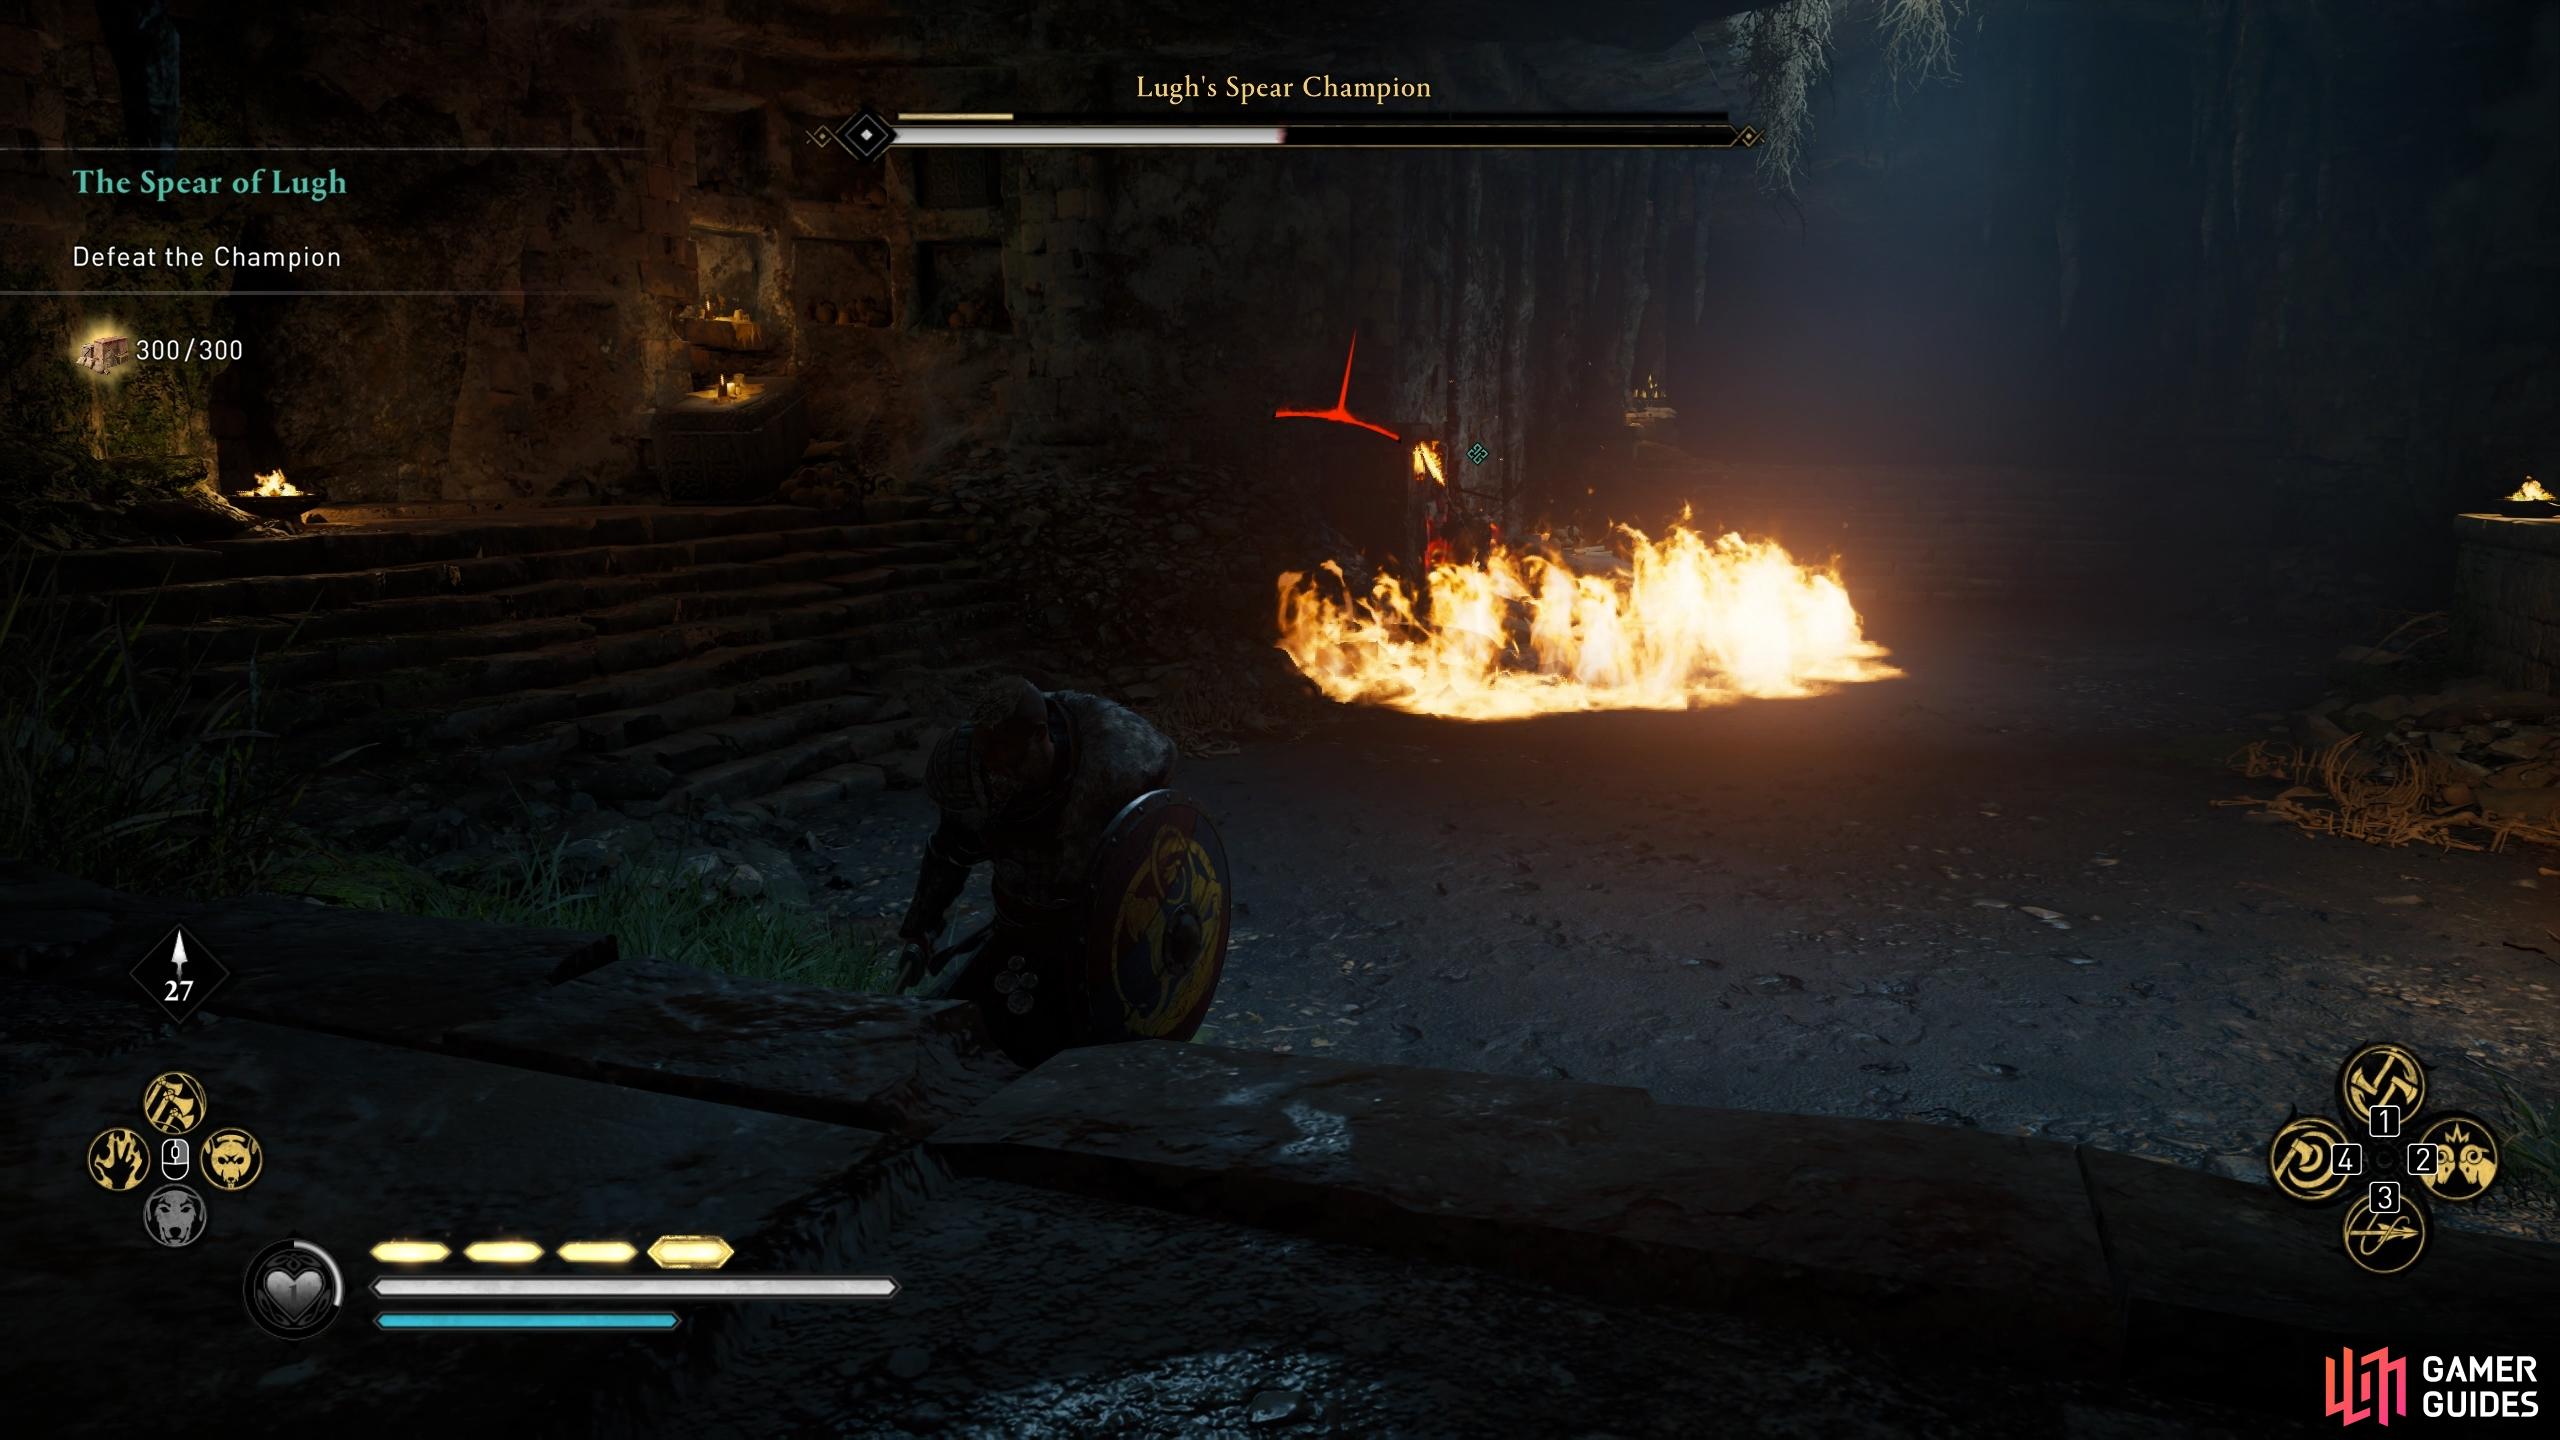 When the Spear Champion spawns a fire wall, be ready to dodge some incoming projectiles.